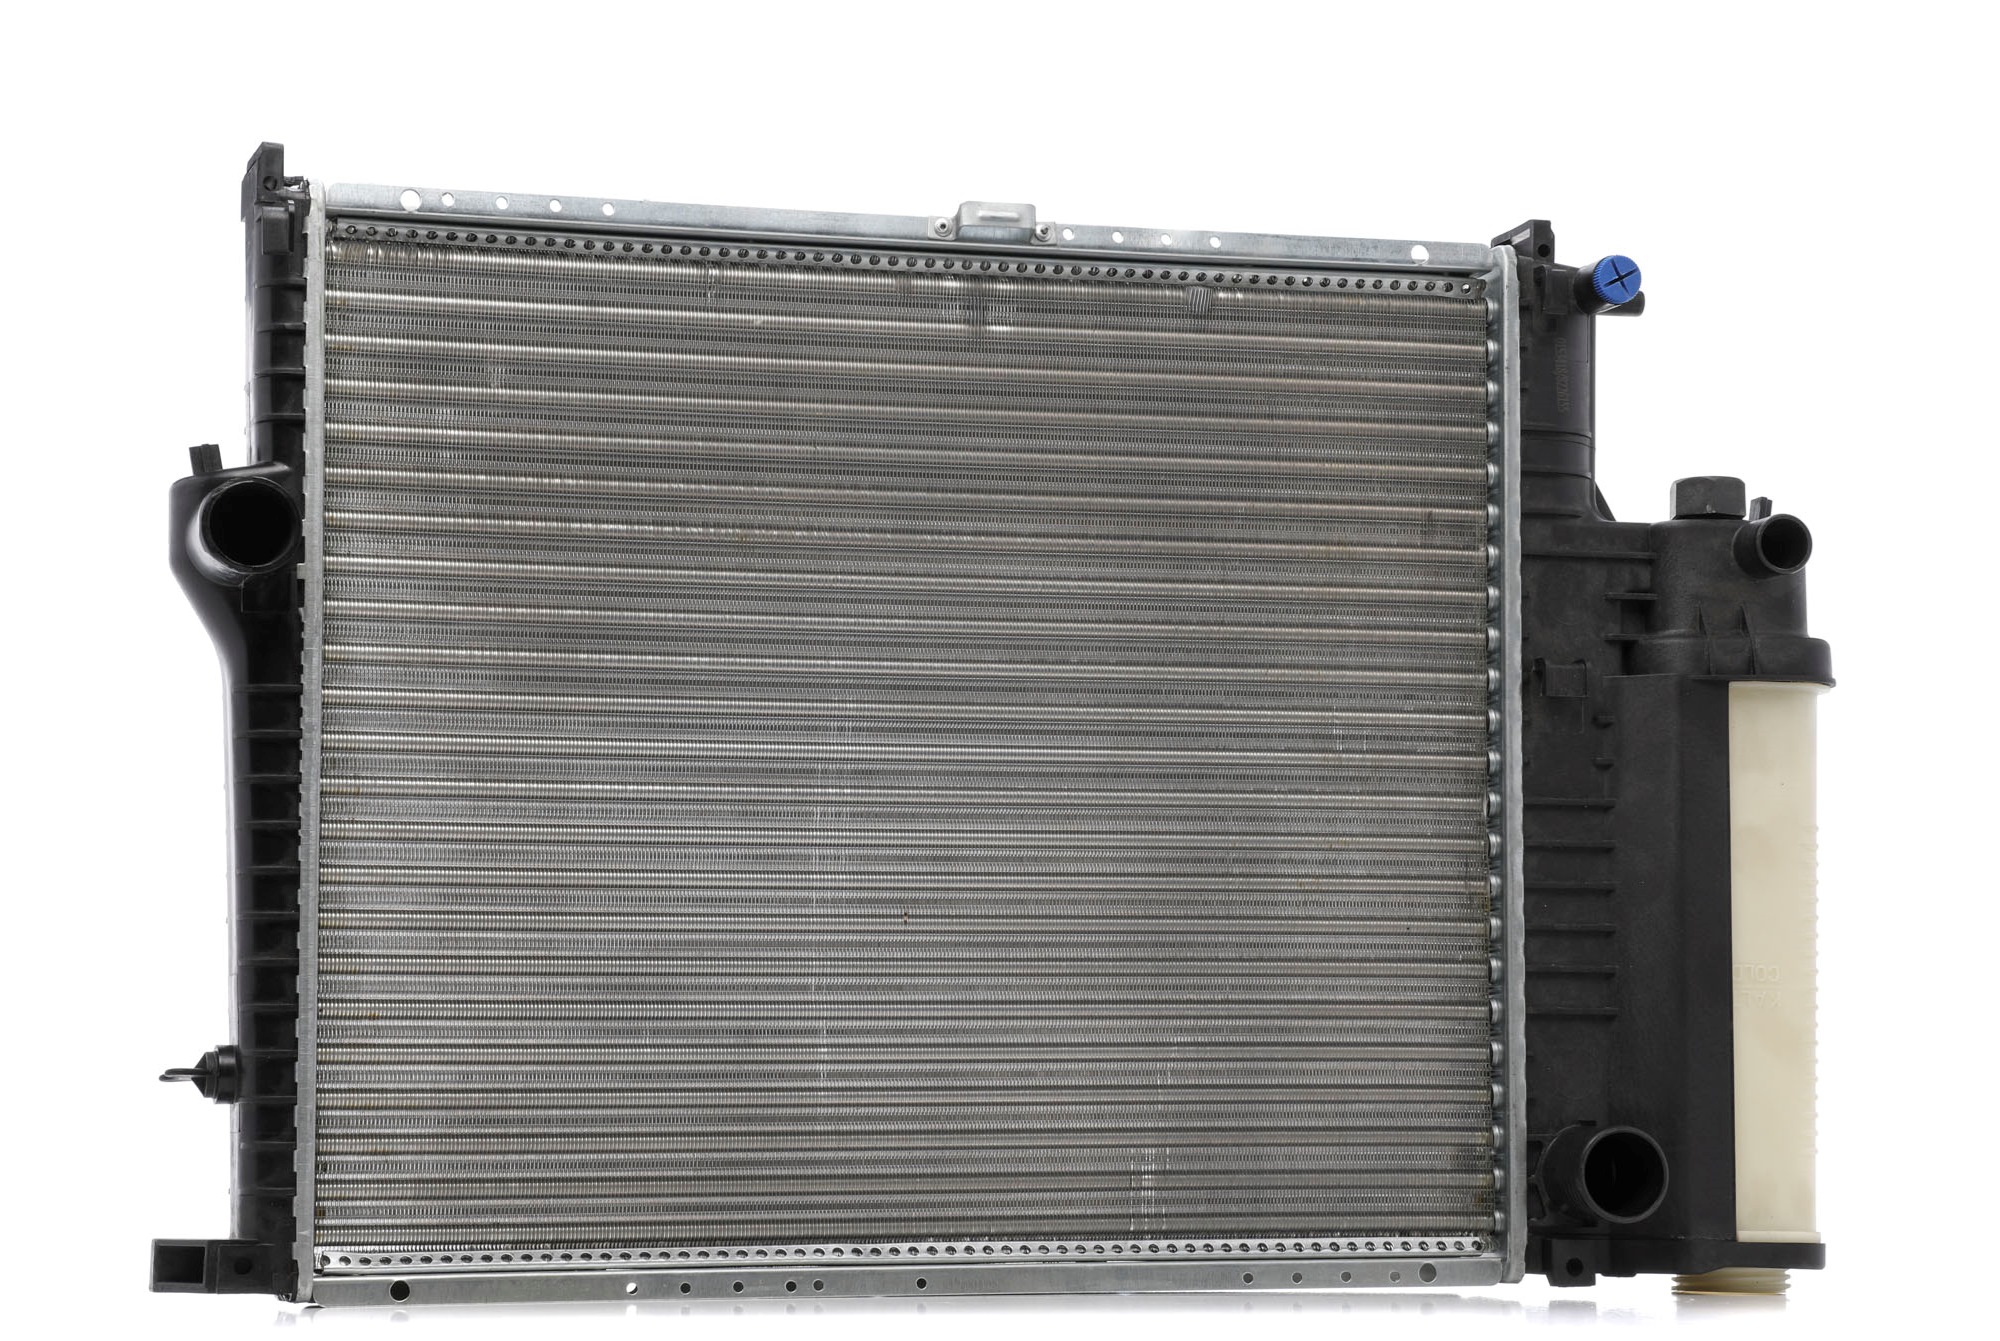 STARK SKRD-0120451 Engine radiator for vehicles with/without air conditioning, 520 x 438 x 32 mm, Manual Transmission, Brazed cooling fins